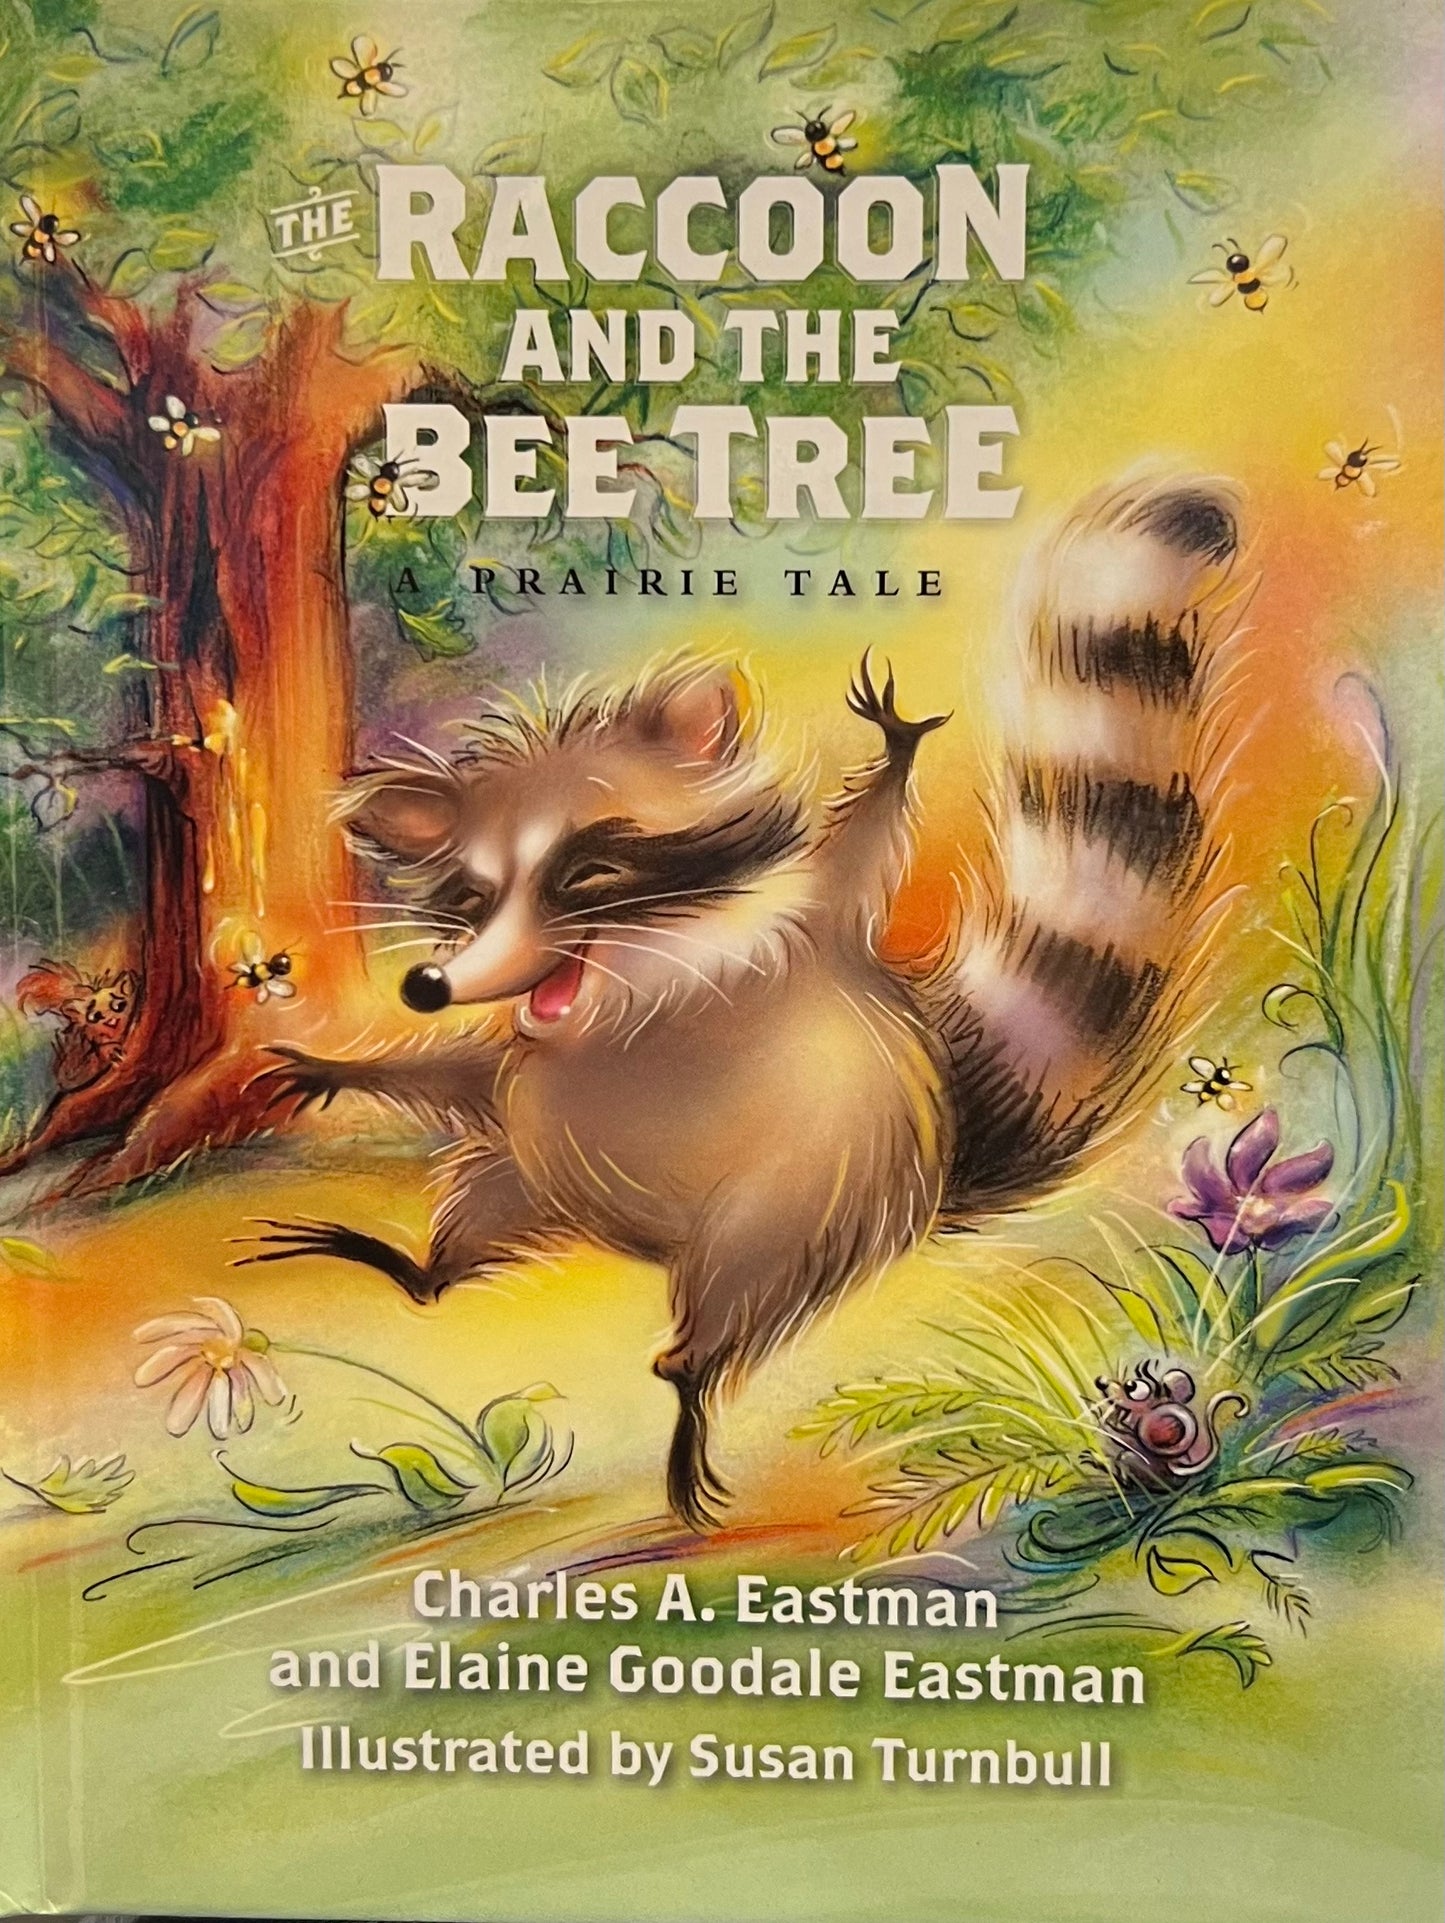 The Raccoon and the Bee Tree: A Prairie Tale